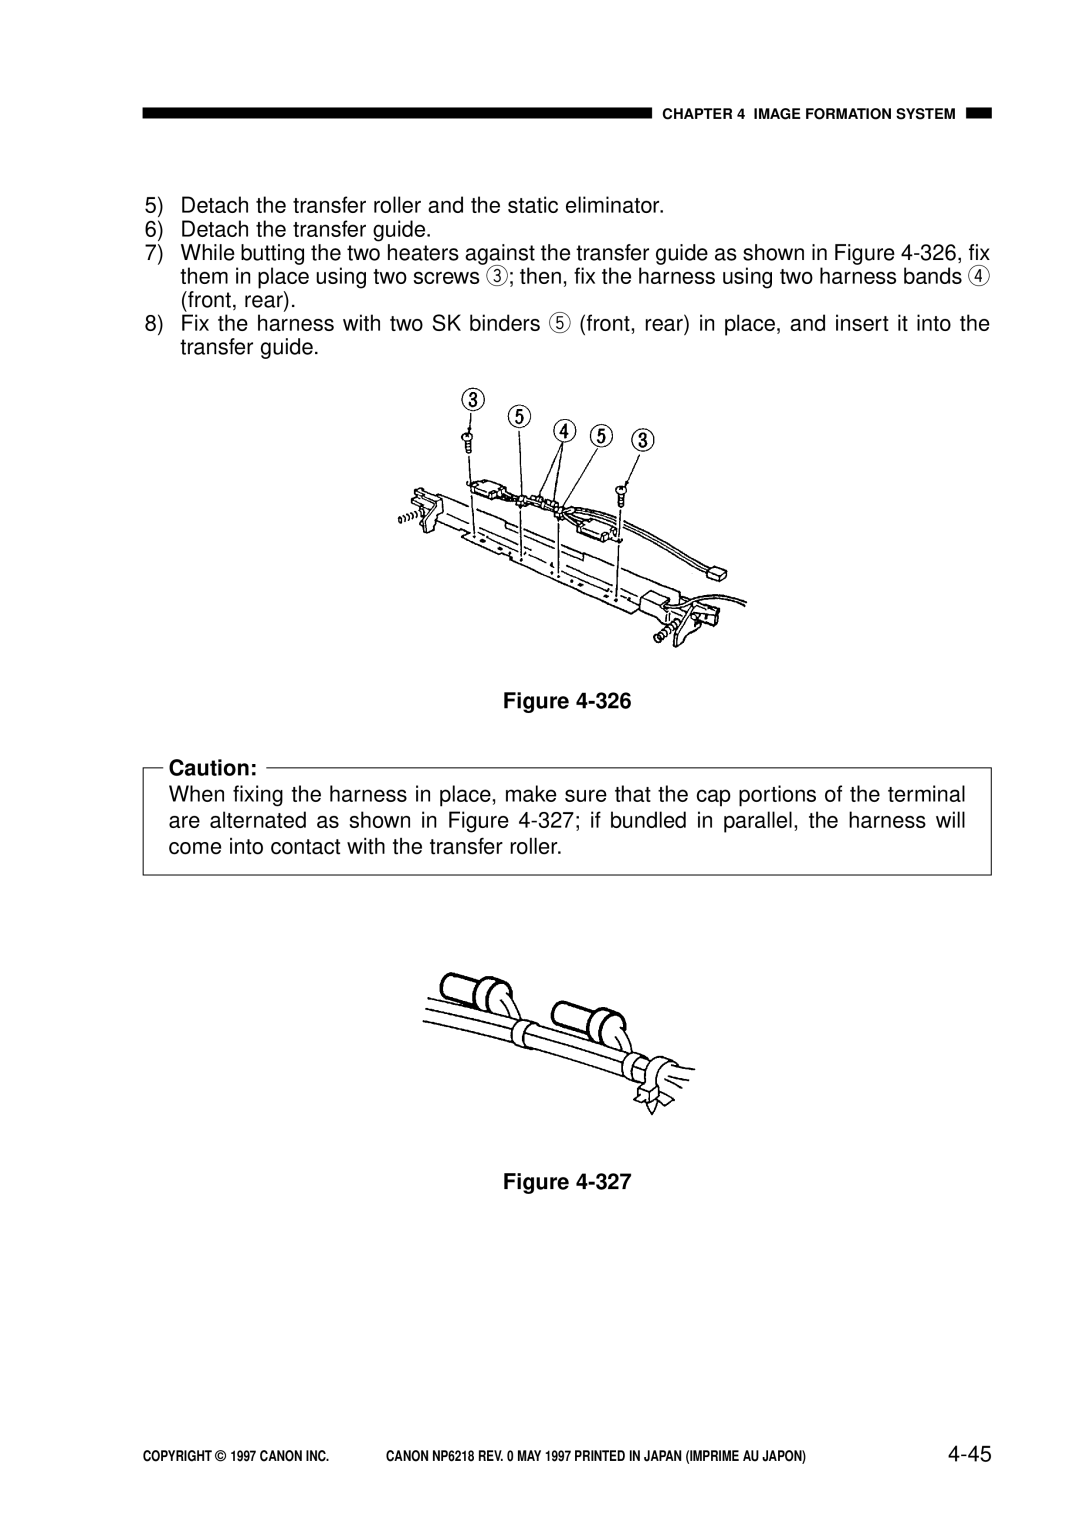 Canon FY8-13EX-000, NP6218 service manual 4-45, Detach the transfer roller and the static eliminator 